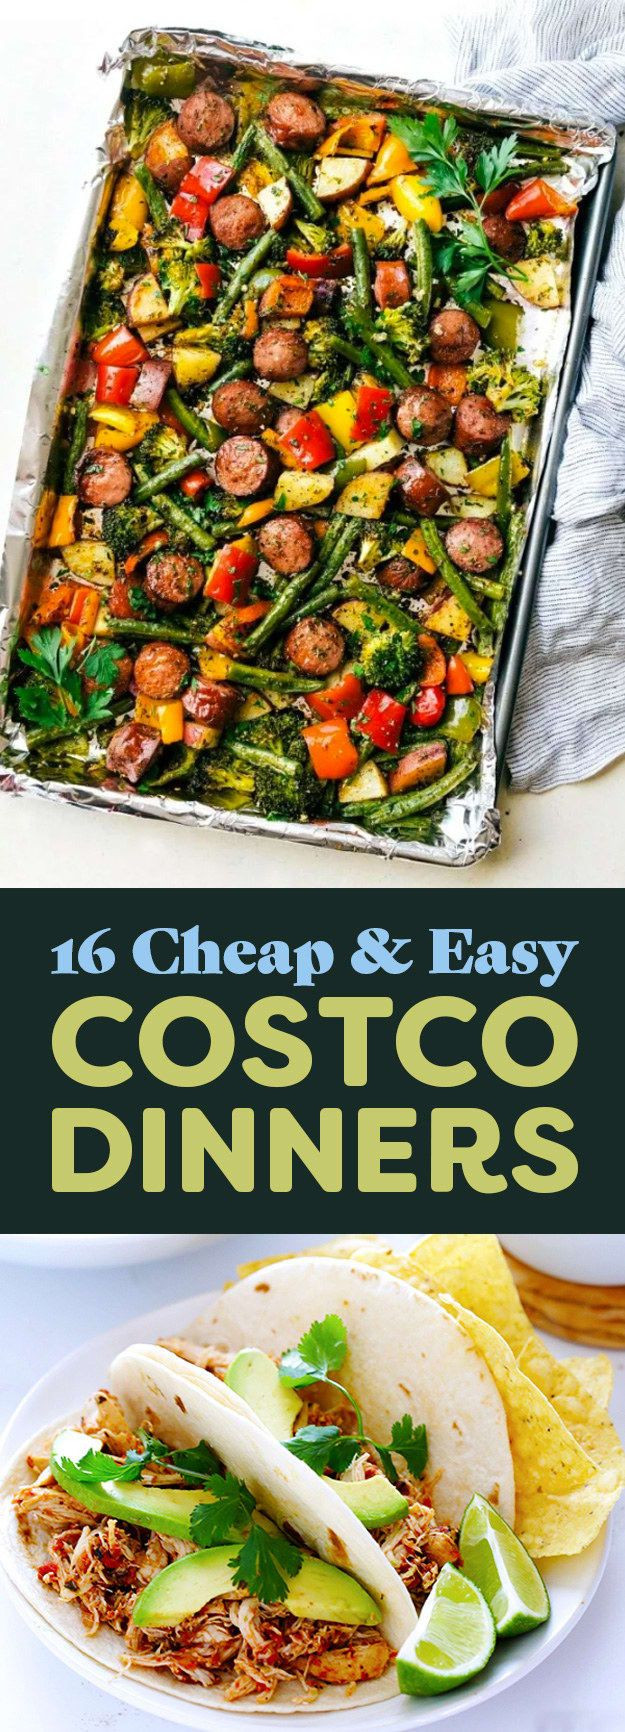 Costco Party Food Ideas
 Best 25 Costco party food ideas on Pinterest